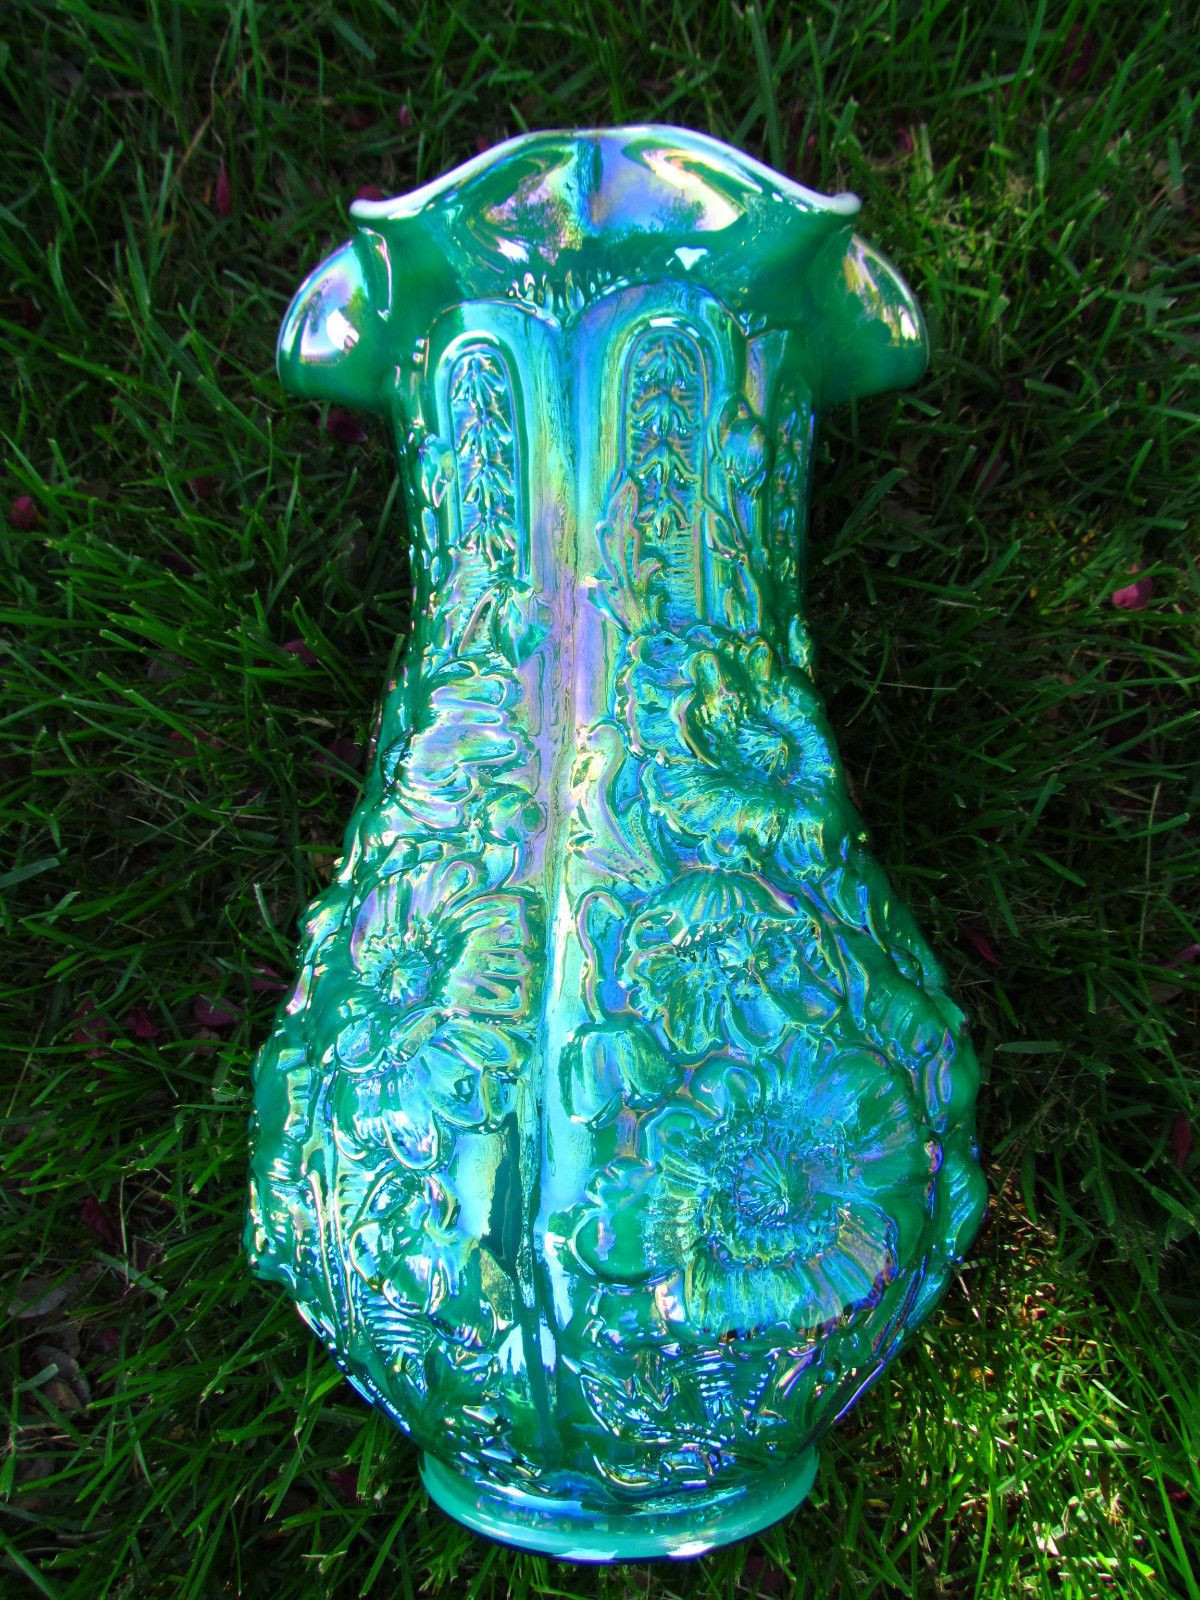 Carnival Glass Vase Of Fenton Poppy Show Vase Emerald Green Jpg Colored Glass Cut within Fenton Poppy Show Vase Emerald Green Jpg